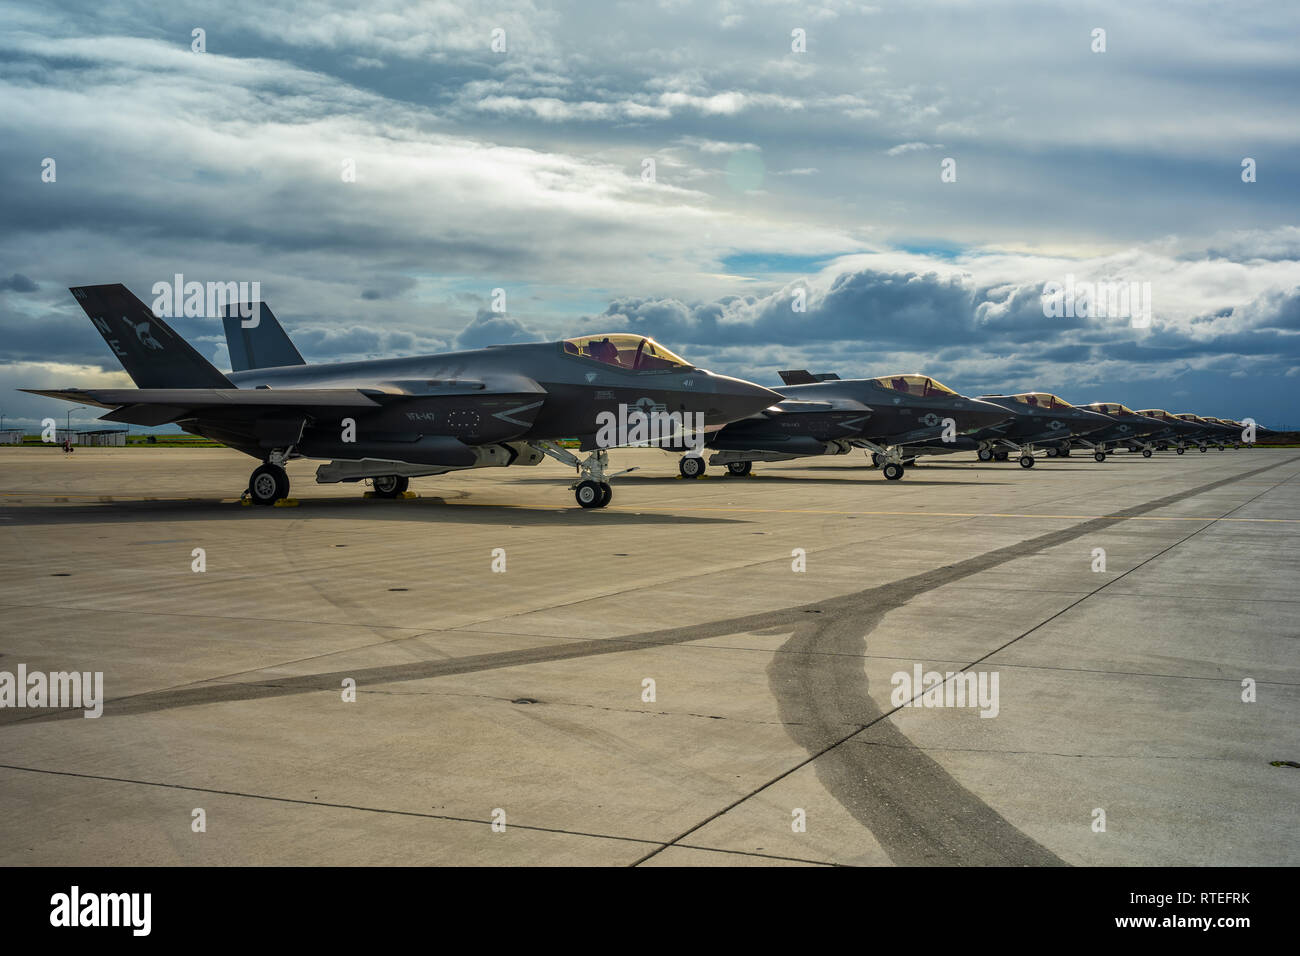 190227-N-KT595-003 LEMOORE, Calif. (Feb. 27, 2019) Ten VFA-147 Argonaut F-35C aircraft are displayed on the flightline here at Naval Air Station Lemoore (NASL) in celebration of the F-35C's Initial OperationalCapability (IOC) announcement today. IOC declaration is a capability-driven joint decision made by Commander, Naval Air Forces, Vice Admiral DeWolfe Miller III and United Sates Marine Corps Deputy  Commandant for Aviation (DCA), Lieutenant General Stephen R. Rudder.  Achieving IOC means the F-35C is available to be used in deployed environments as requested by combatant commanders. (U.S.  Stock Photo